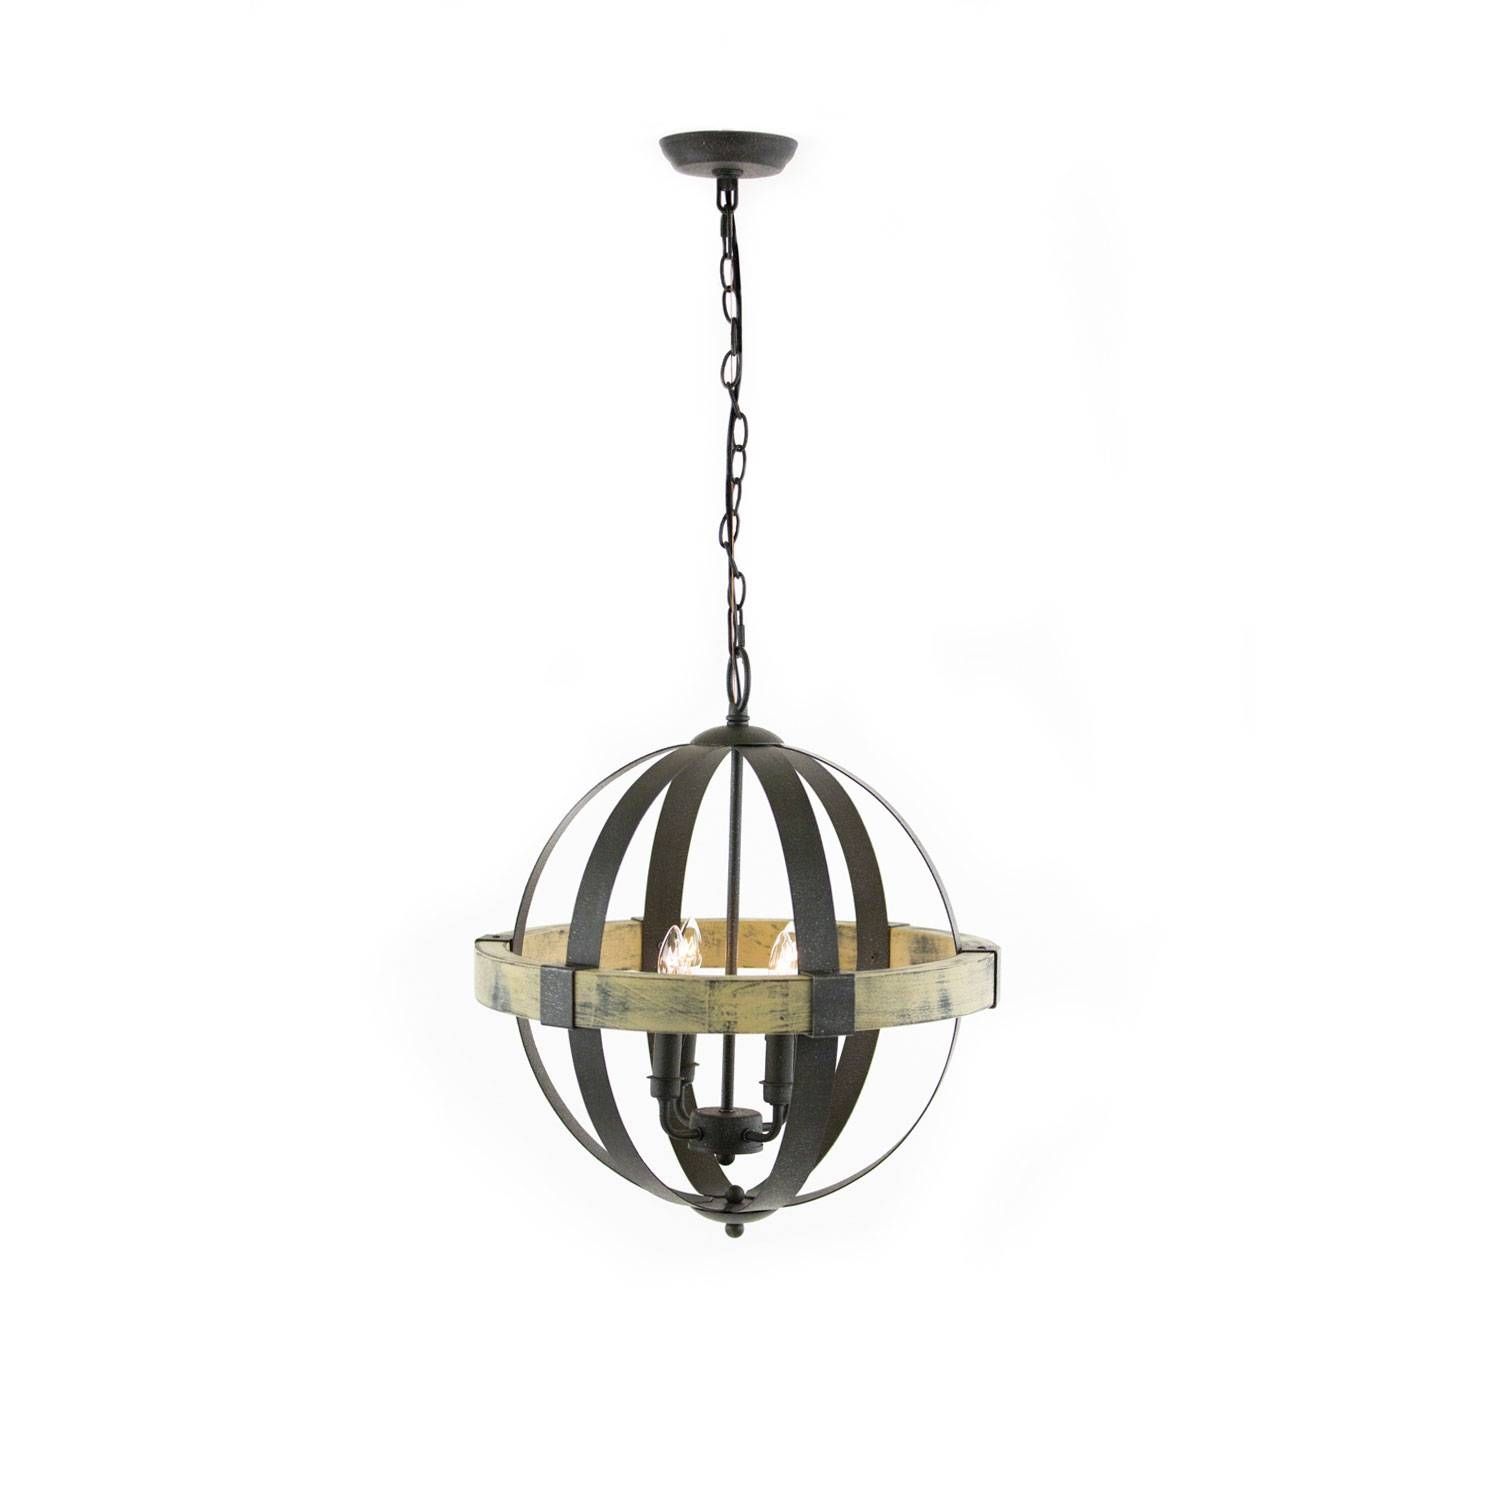 Black Wrought Iron Chandeliers | Chandelier Models With Black Wrought Iron Pendant Lights (View 14 of 15)